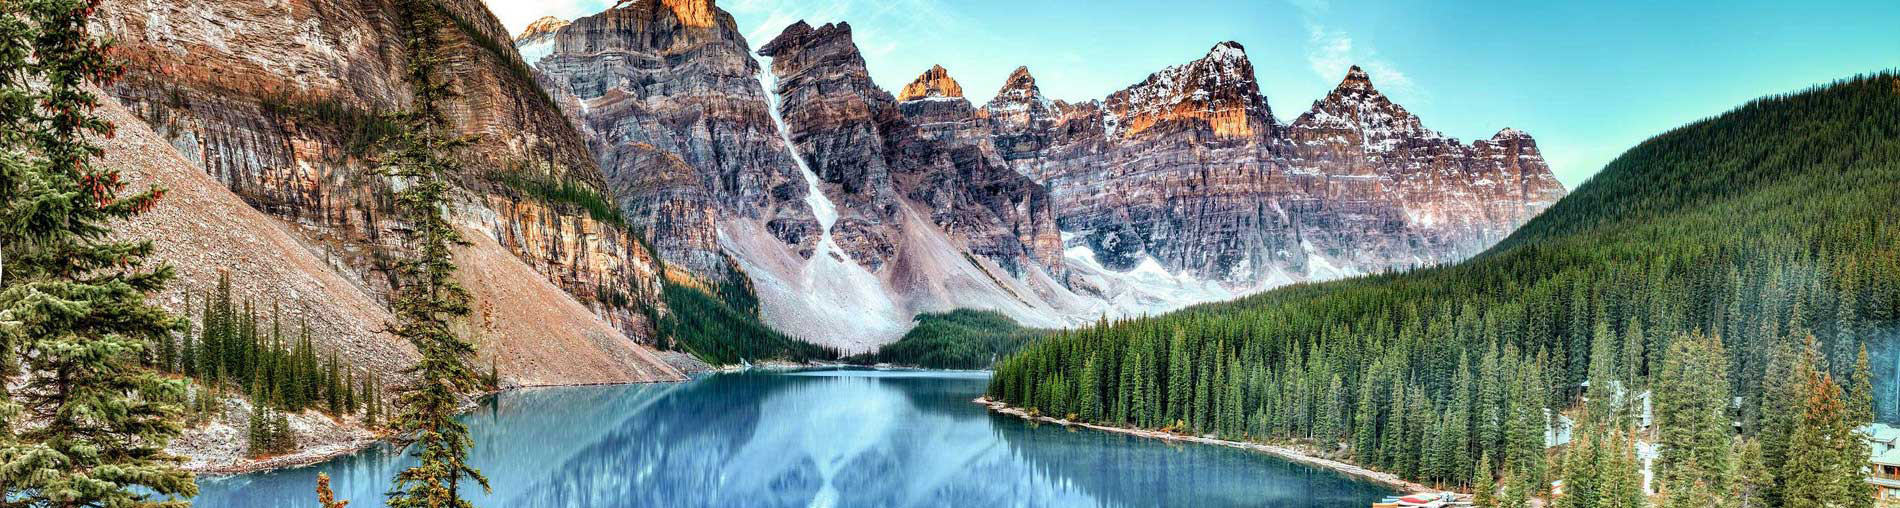 Affordable Holiday Tour Packages to Canada